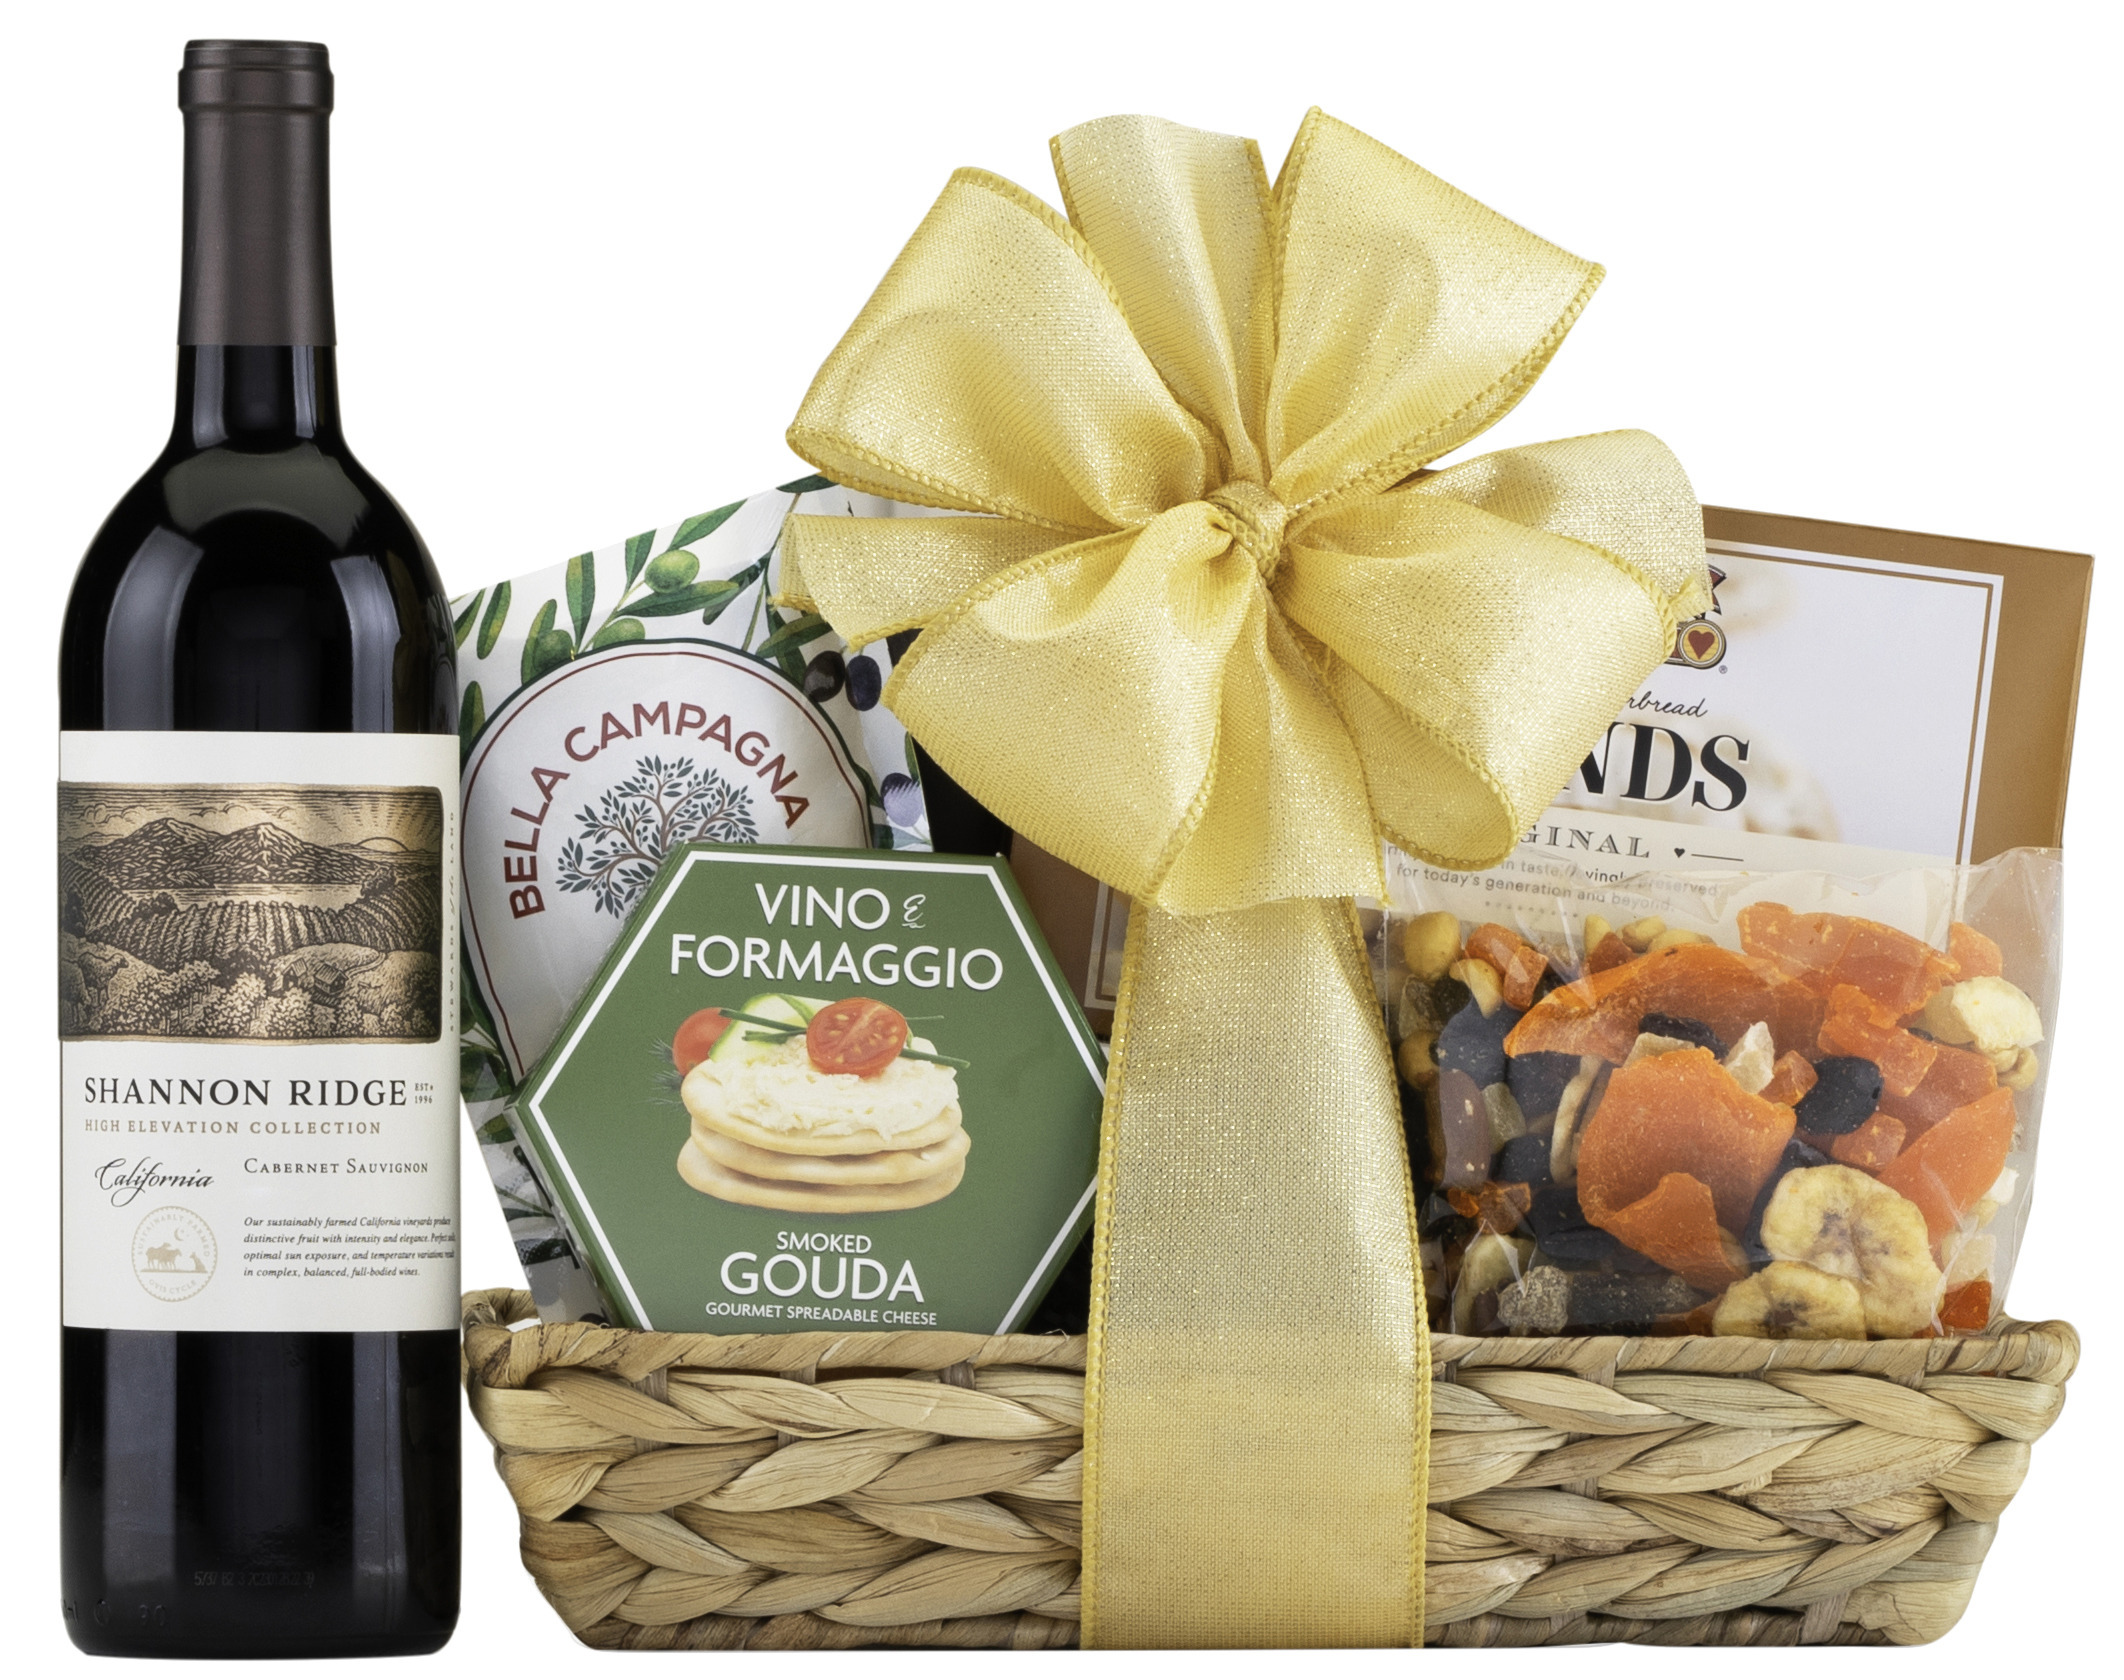 New York Gourmet Food In A Gift Basket